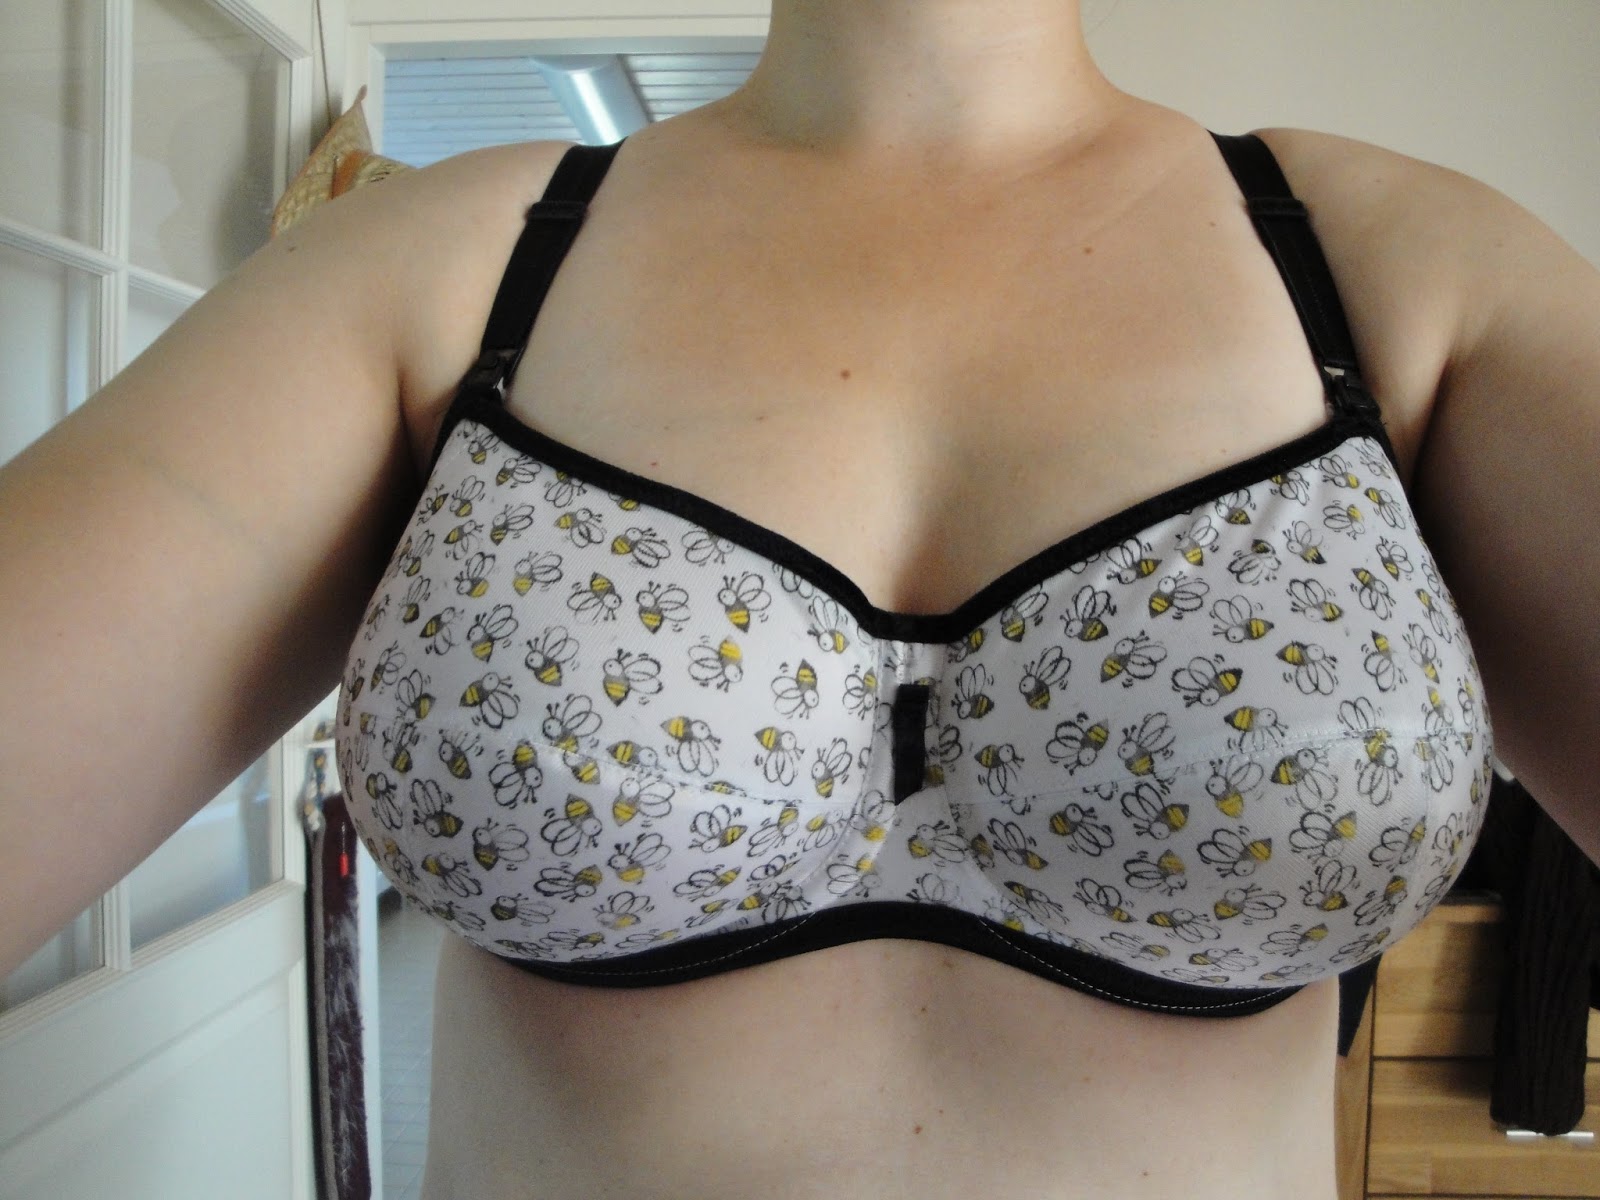 Bras have left a permanent dark imprint where they sit; how can I